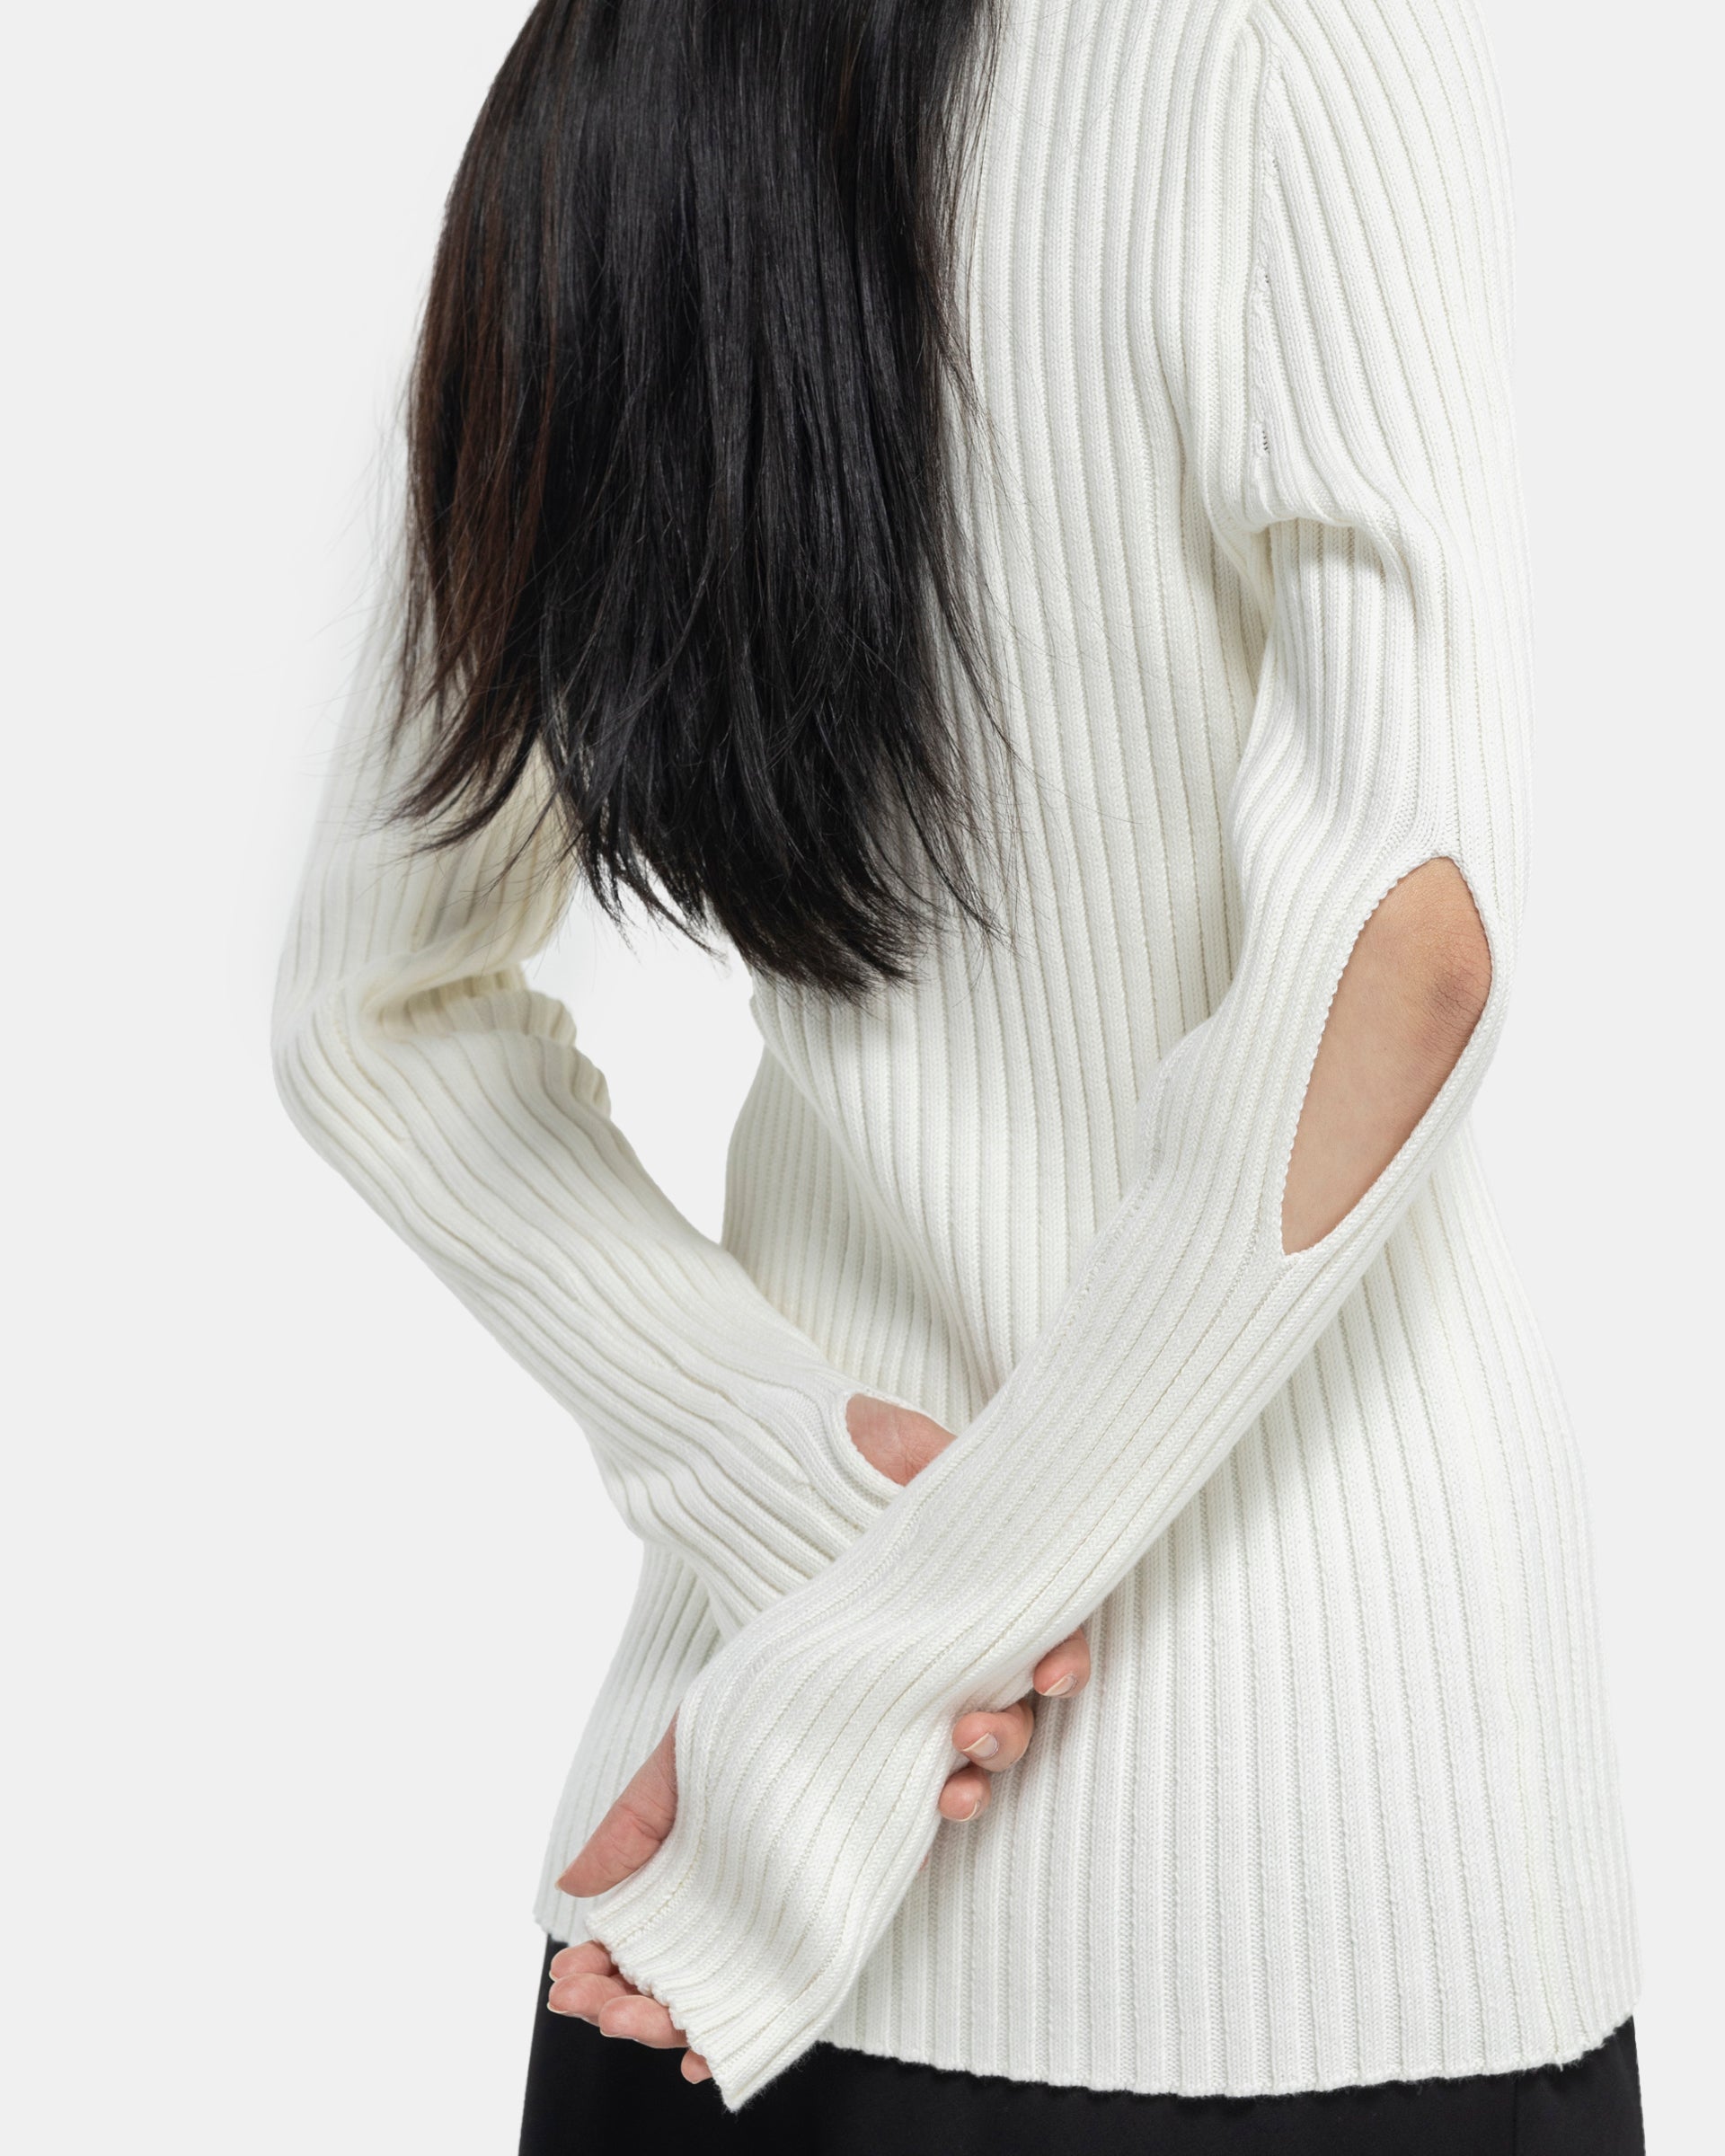 Strap Knit Crew in Ivory